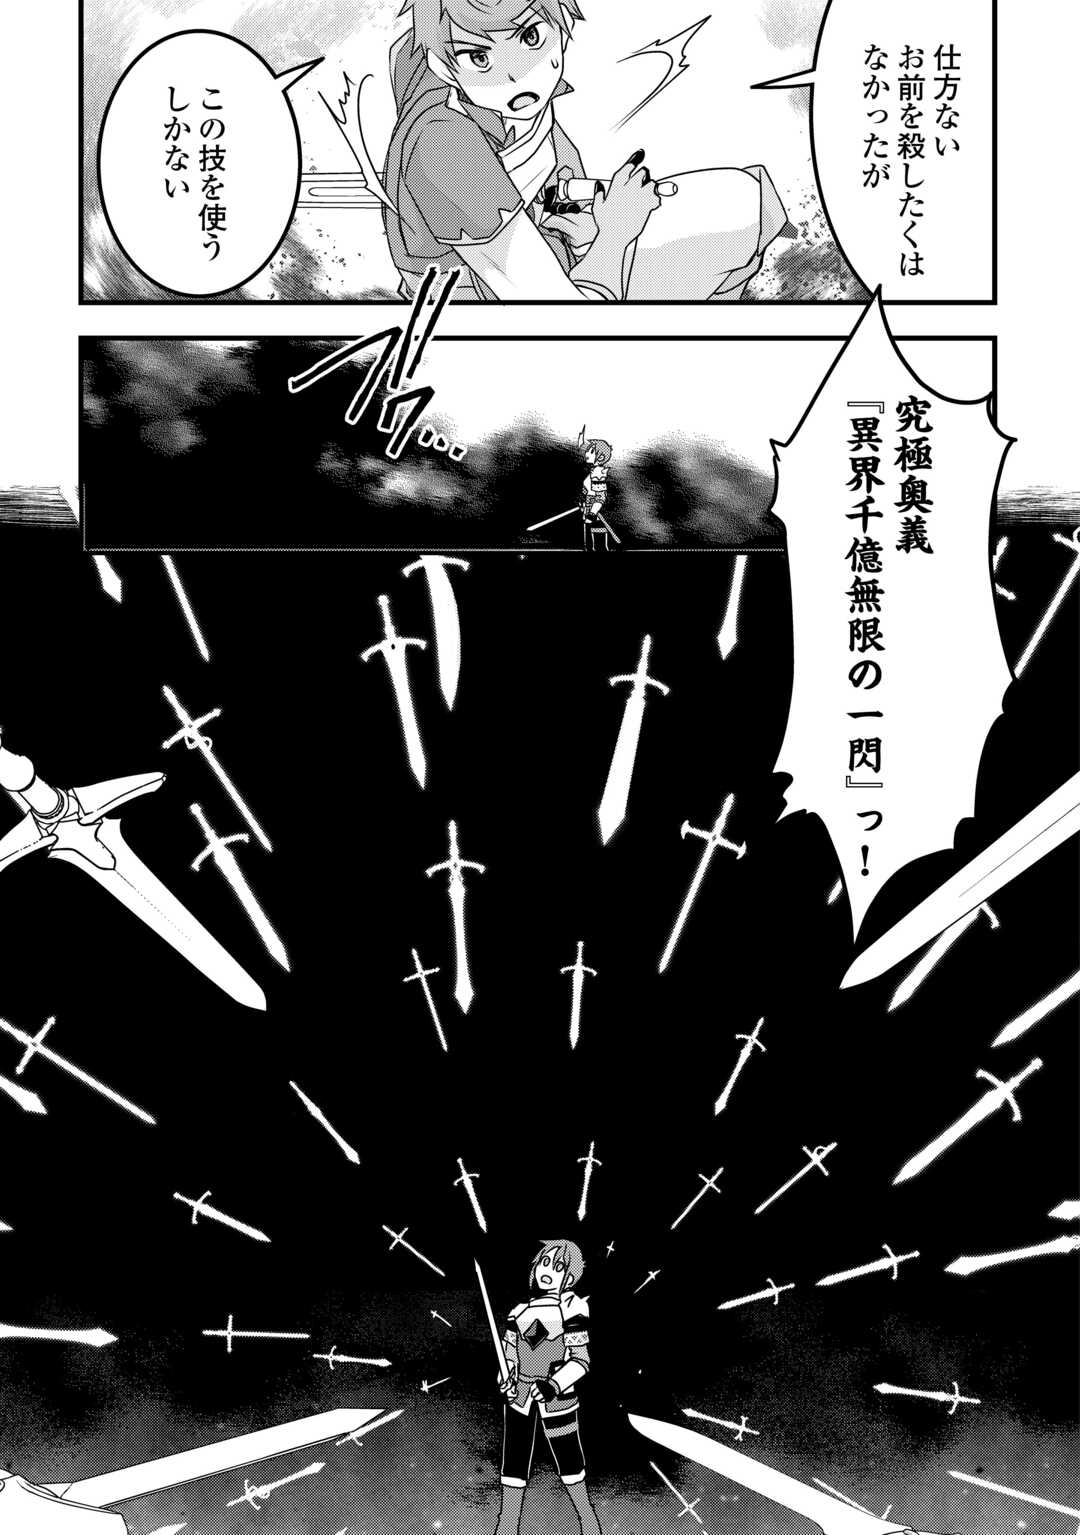 Mugen No Skill Getter! - Chapter 31 - Page 17